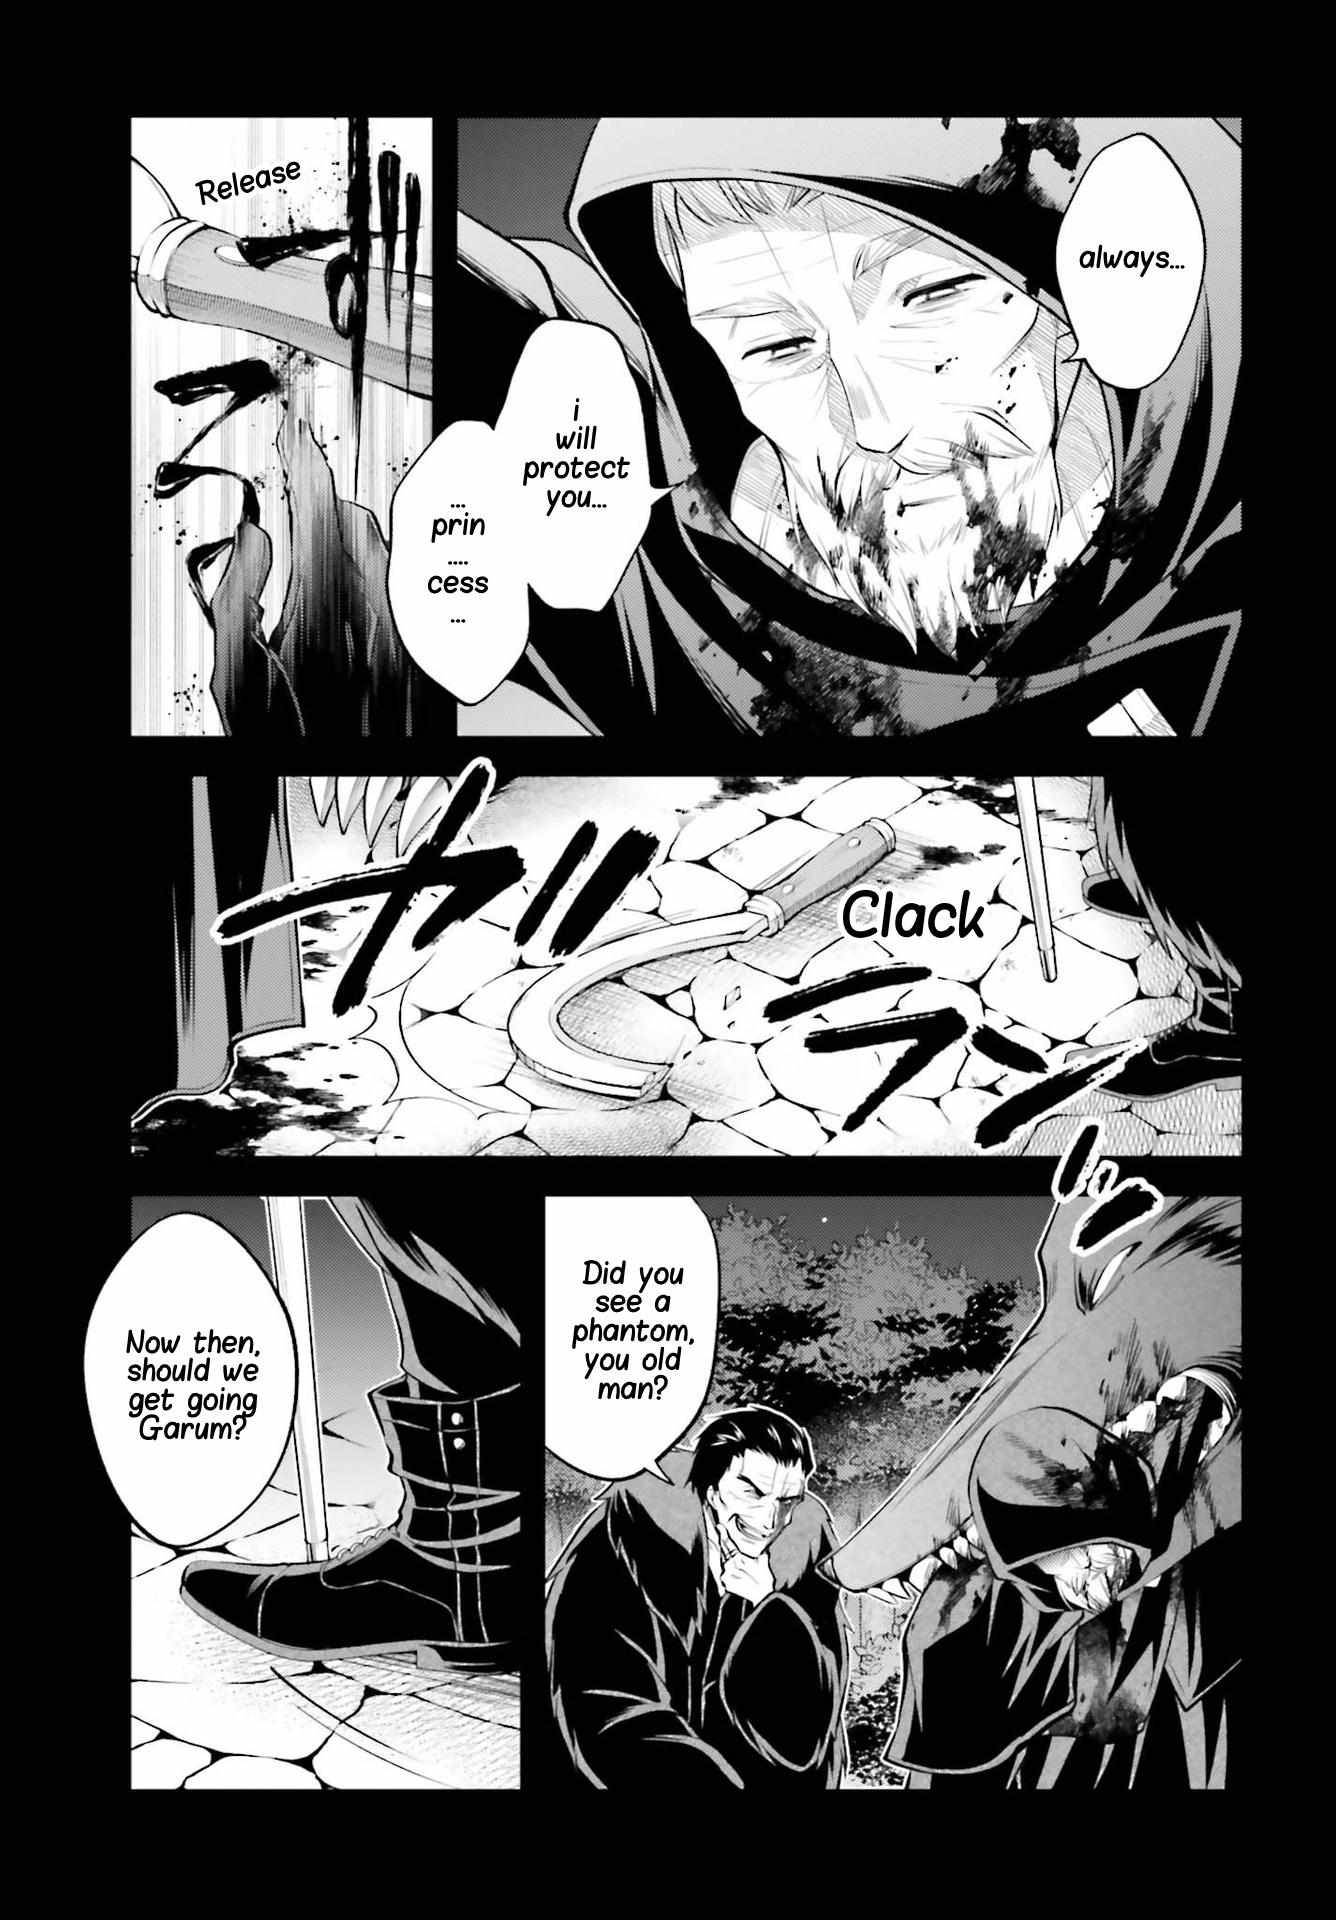 The Villainess Who Has Been Killed 108 Times - chapter 9.2 - #6